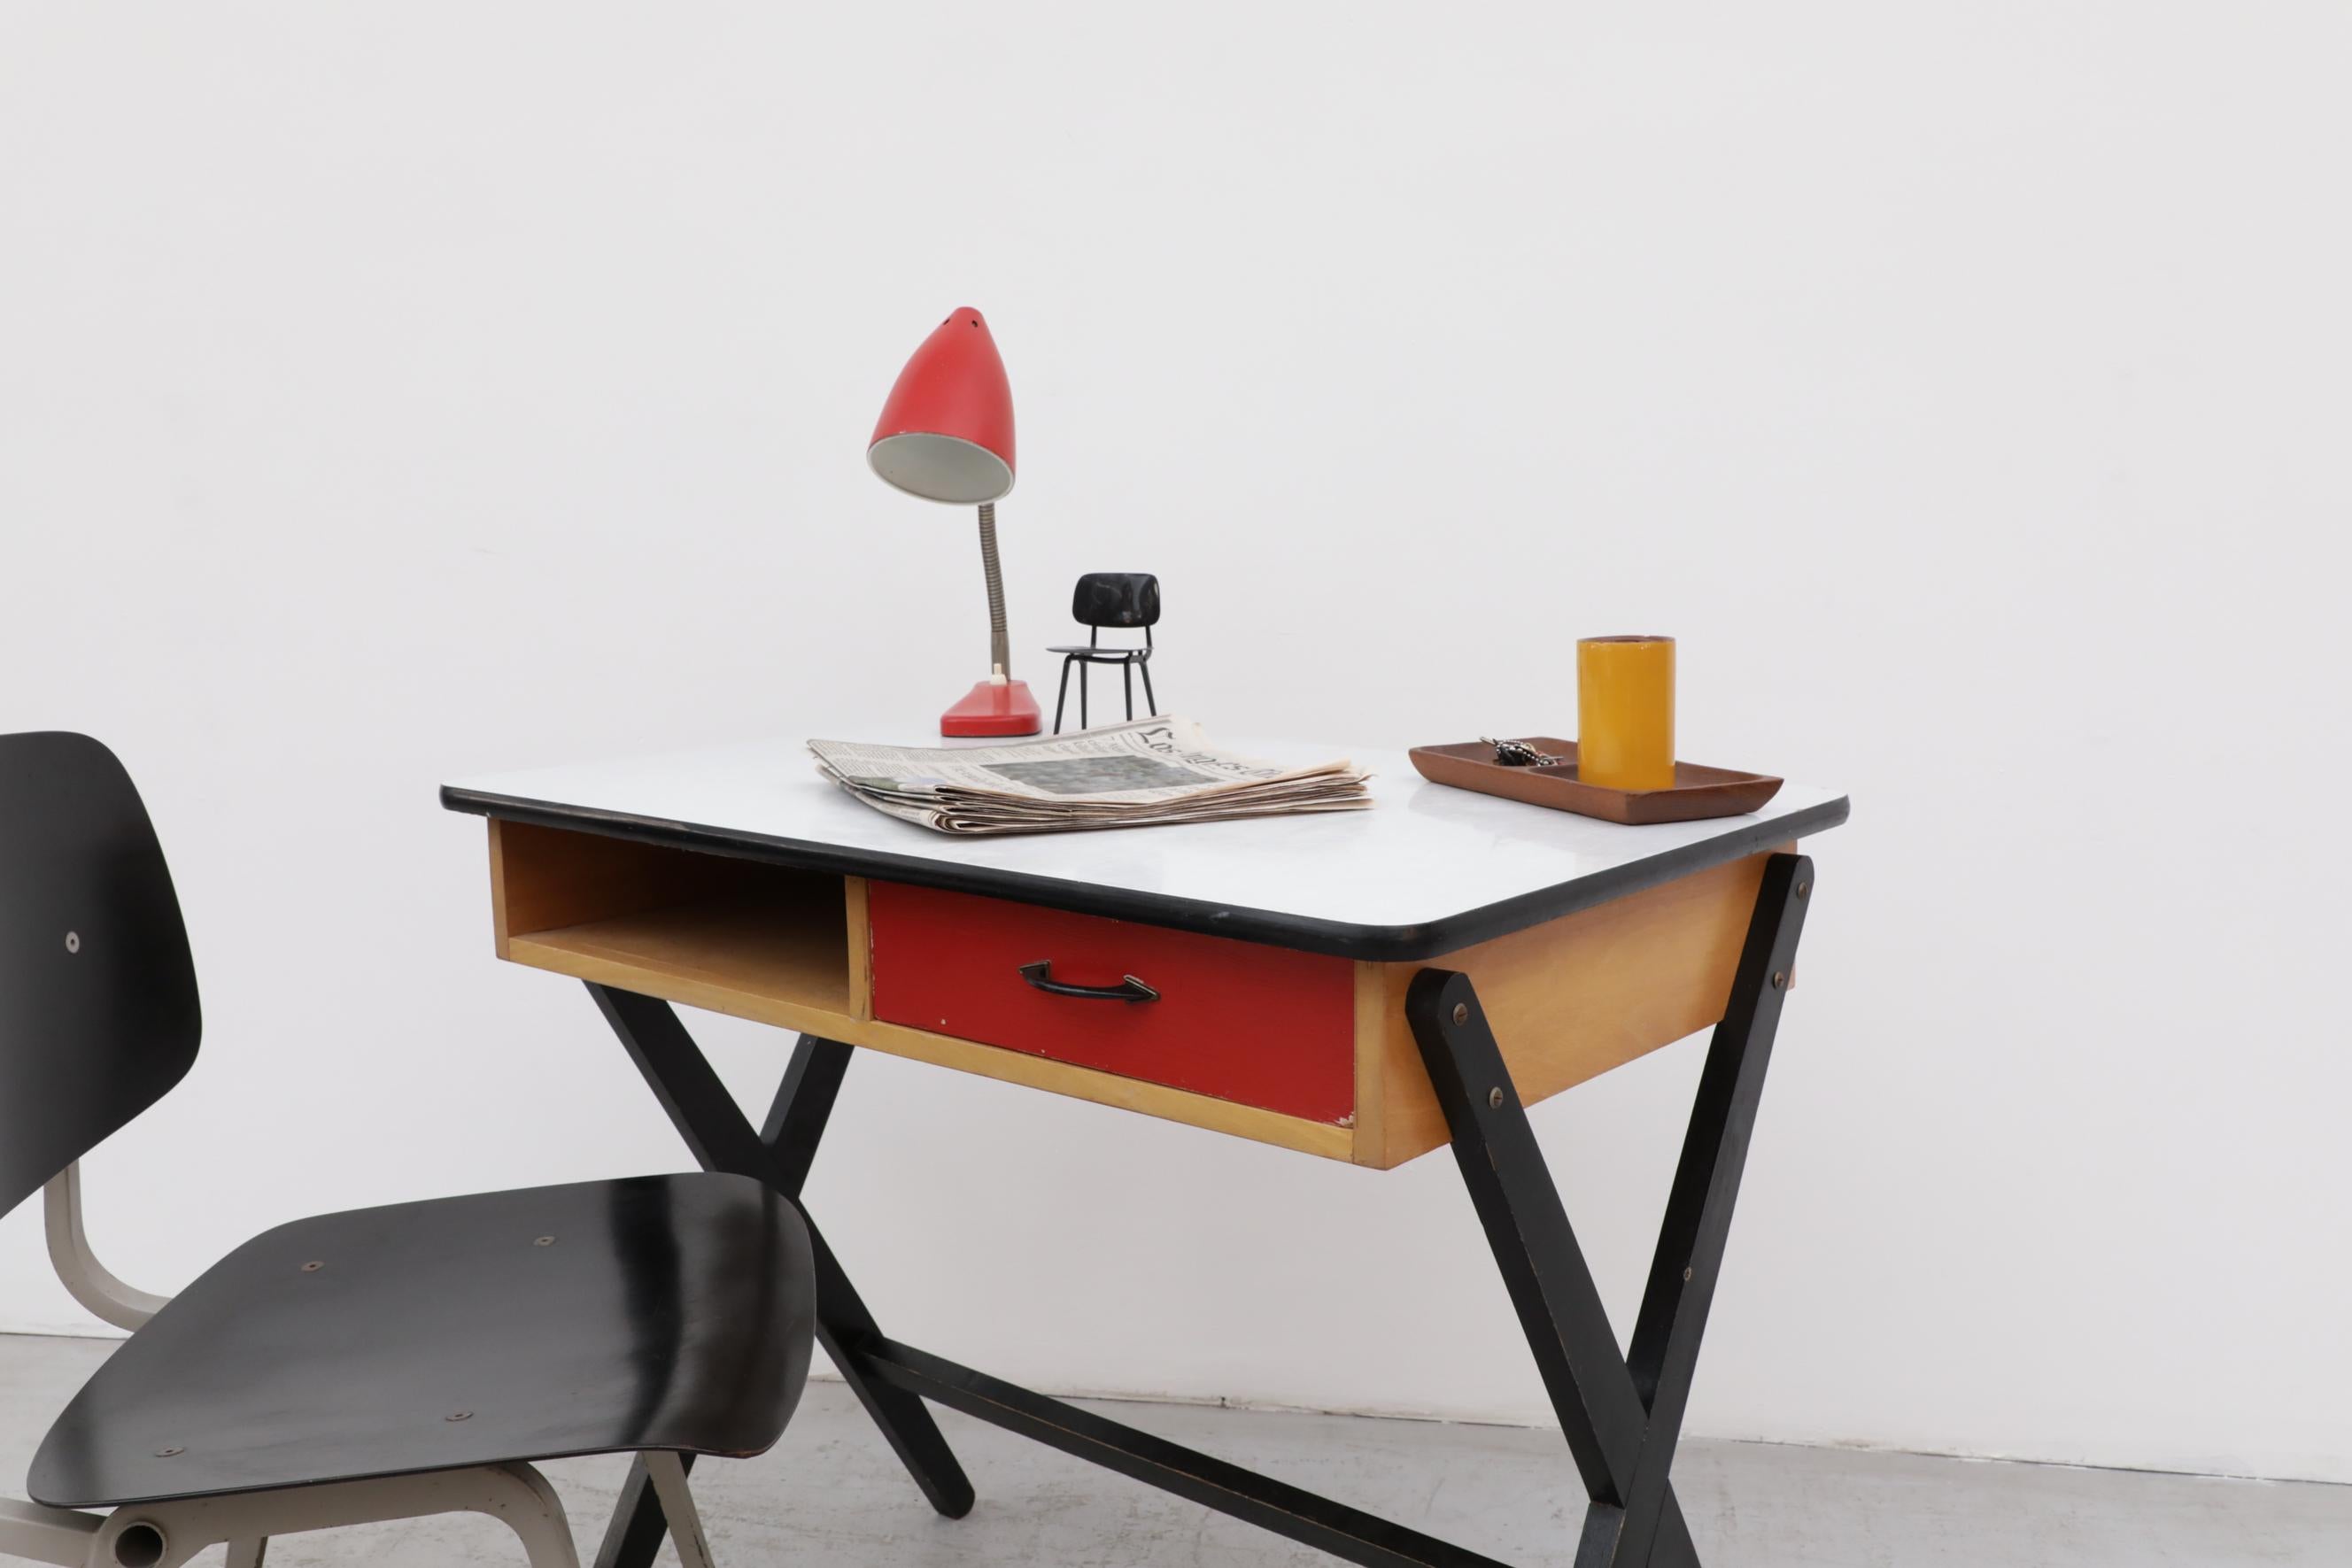 1954 Coen de Vries Desk in Birch w/ Ebony Base, Red Drawer and Formica Top For Sale 2